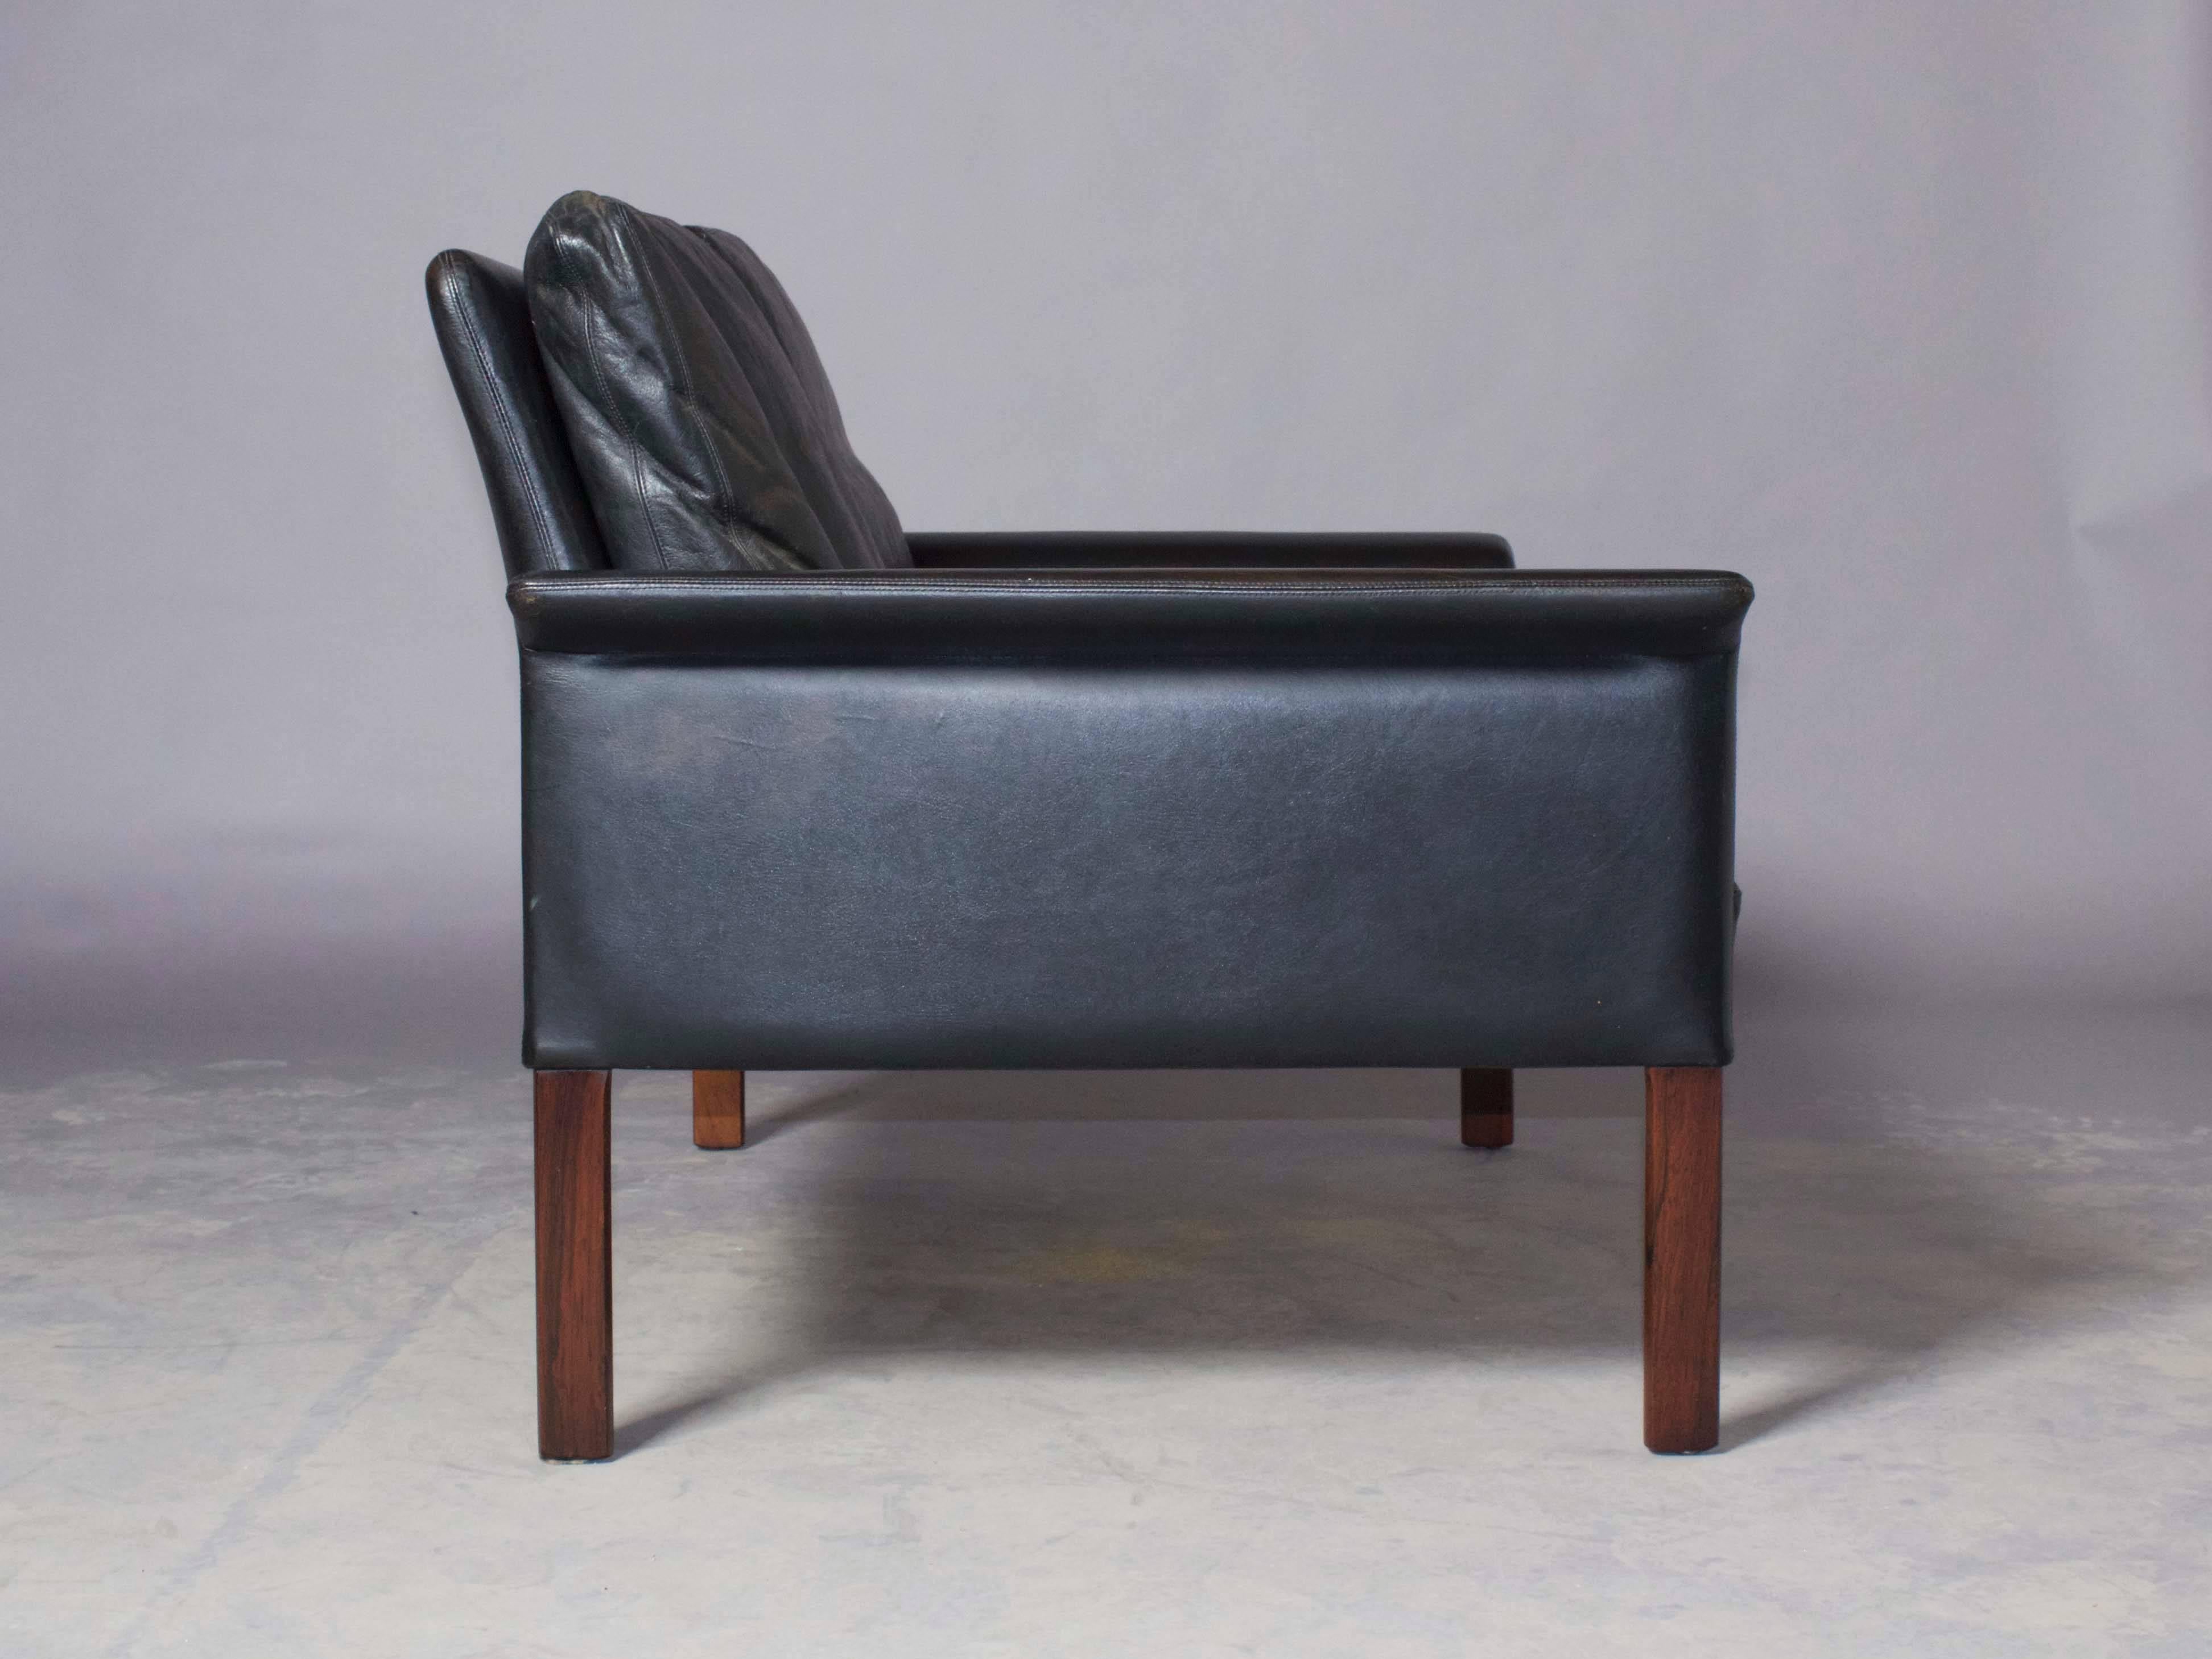 Vintage 1960s Leather Settee by Hans Olsen

This Danish loveseat is in amazing condition. The leather is broken in just right and the cushions are filled with feather and down. The legs are solid rosewood, and fits in just about any corner or nook